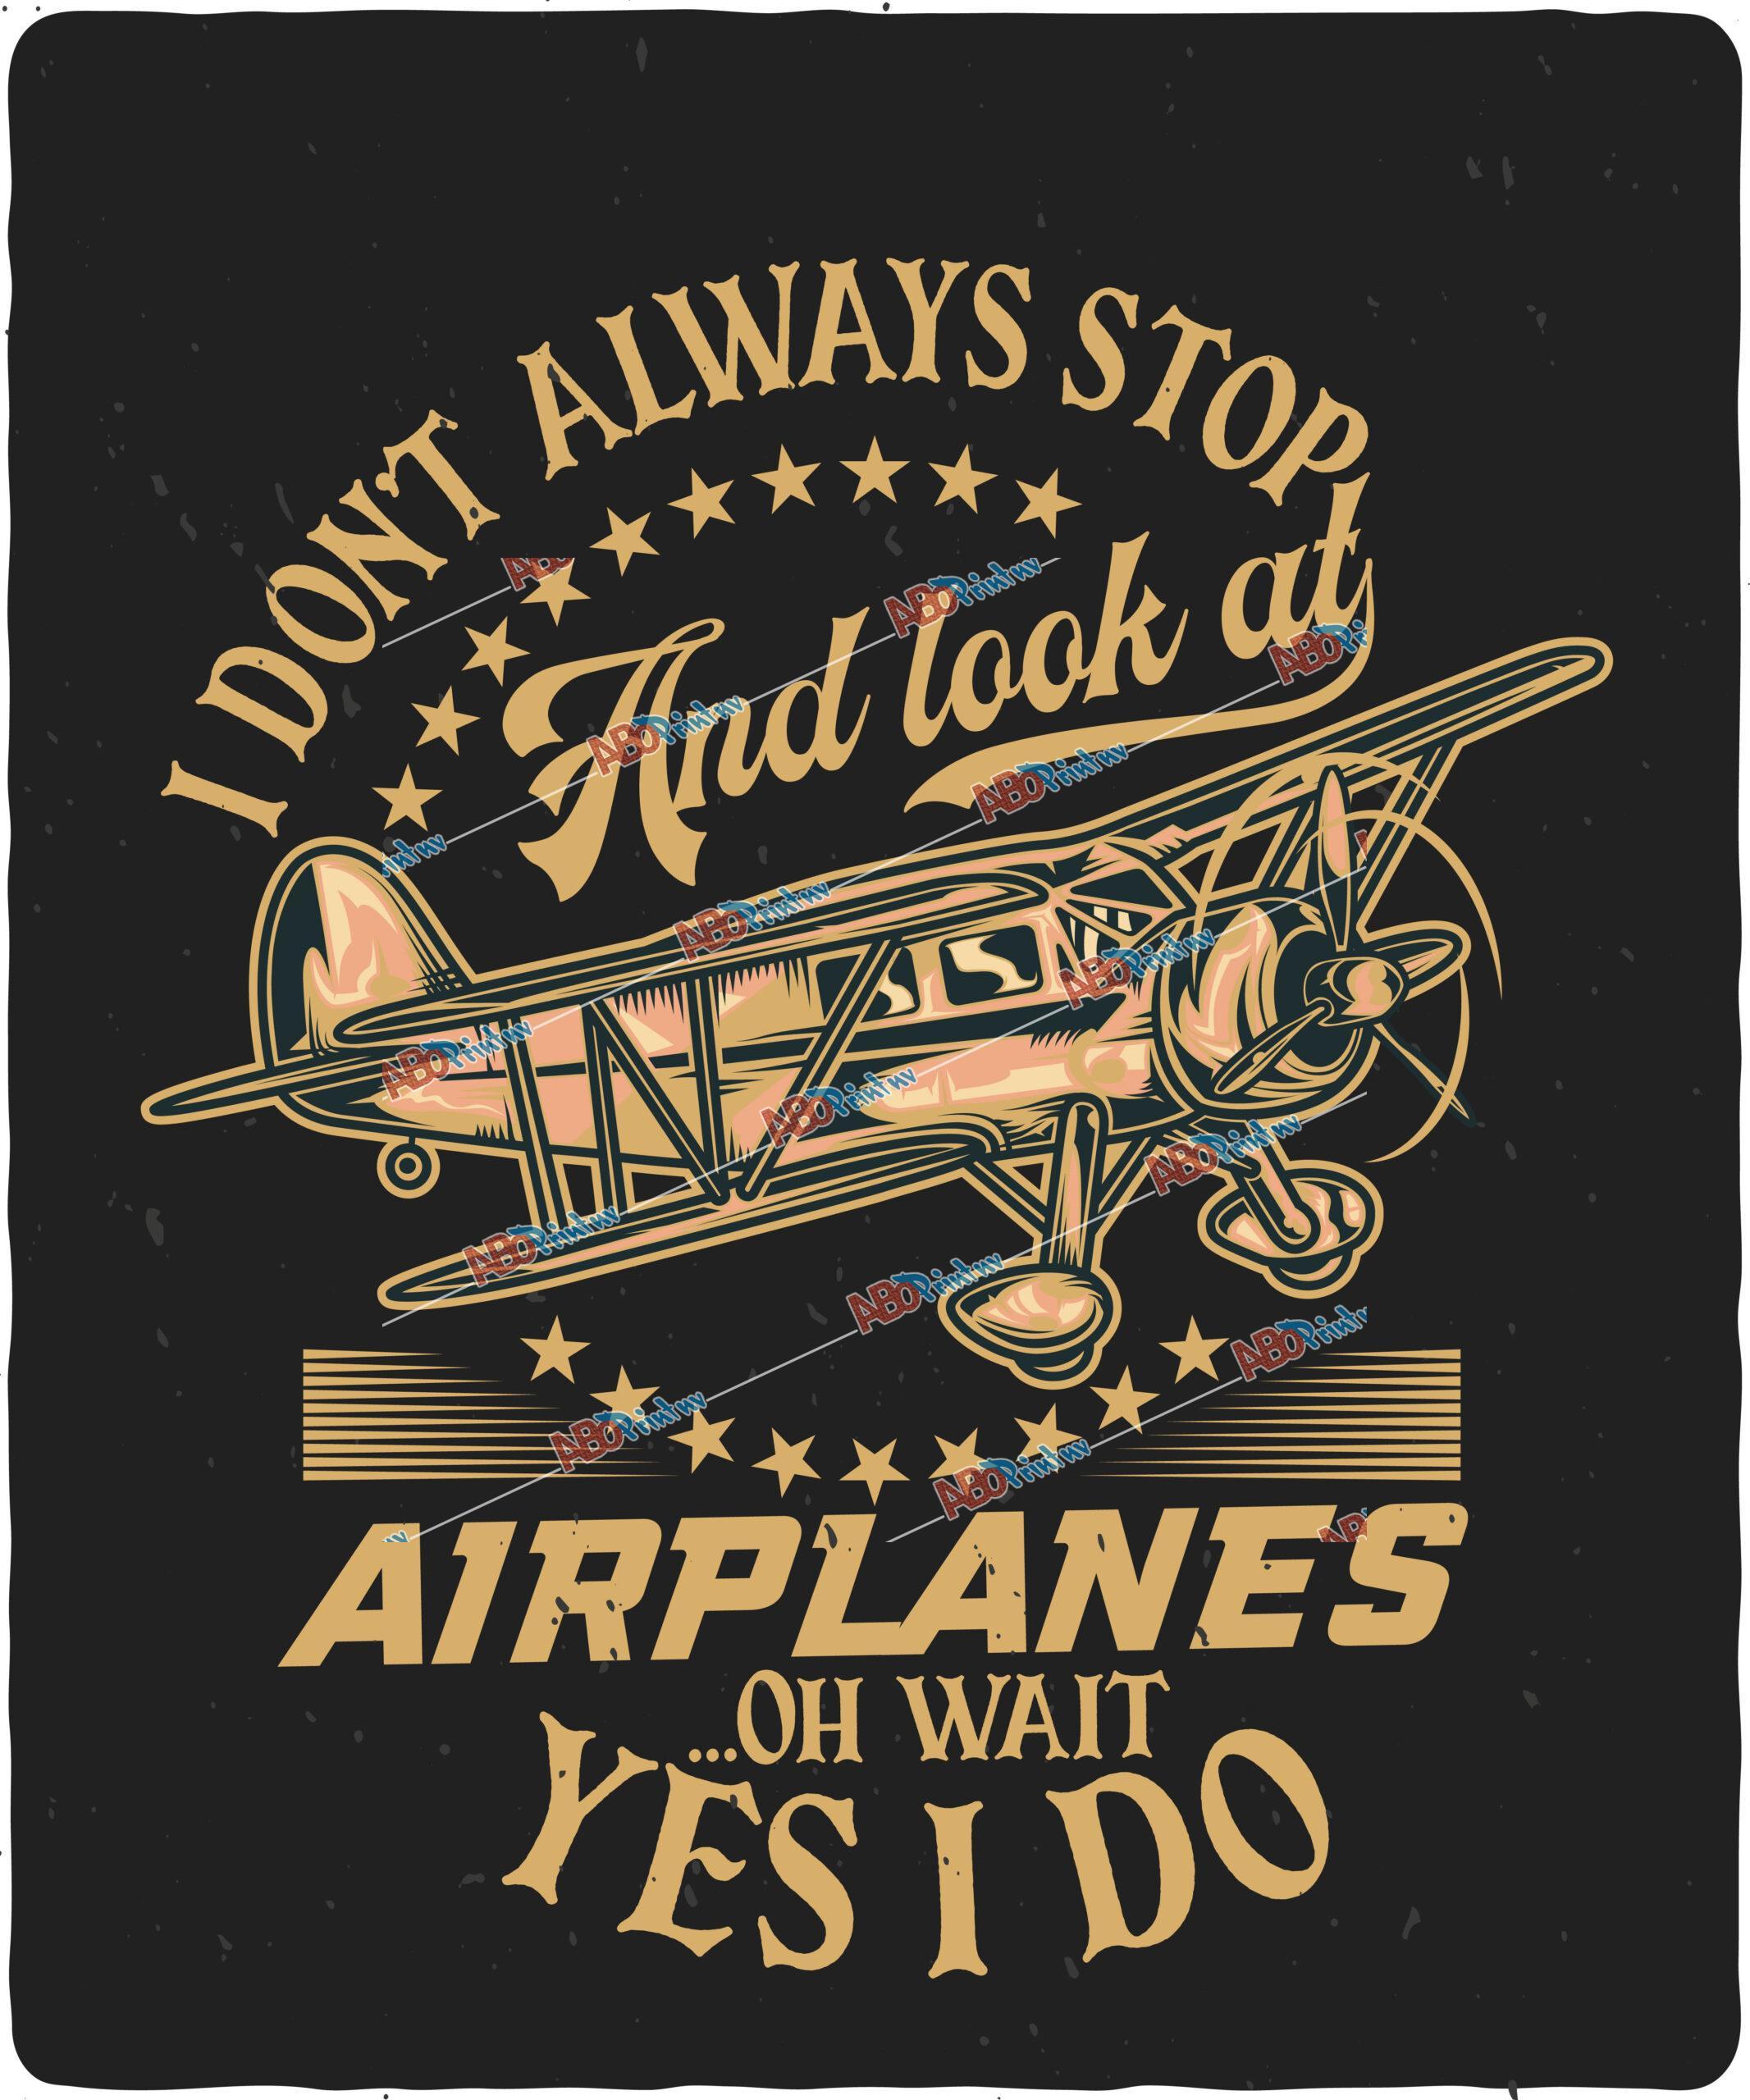 I don’t always stop and look at airplanes ...oh wait yes i do